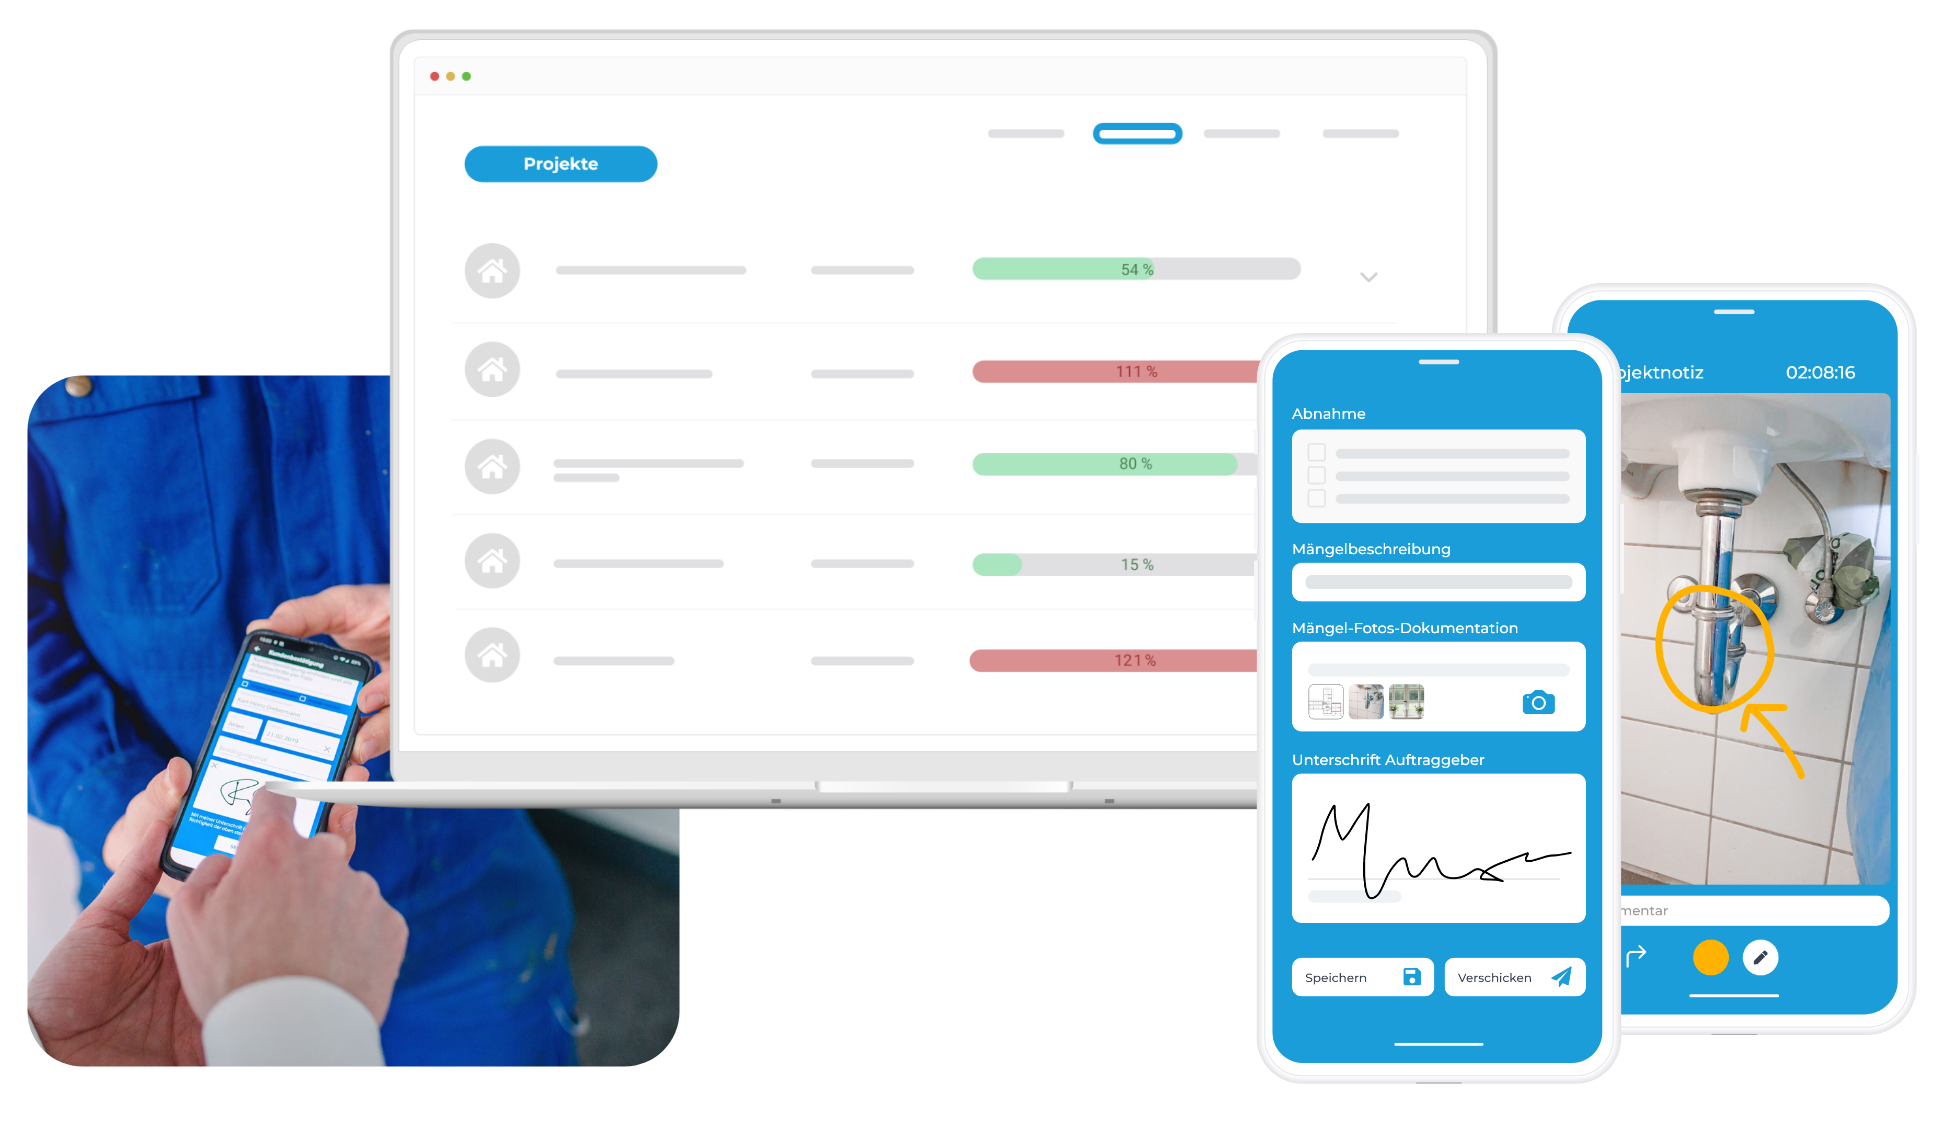 Monitor orders and document signatures, notes or sketches via app